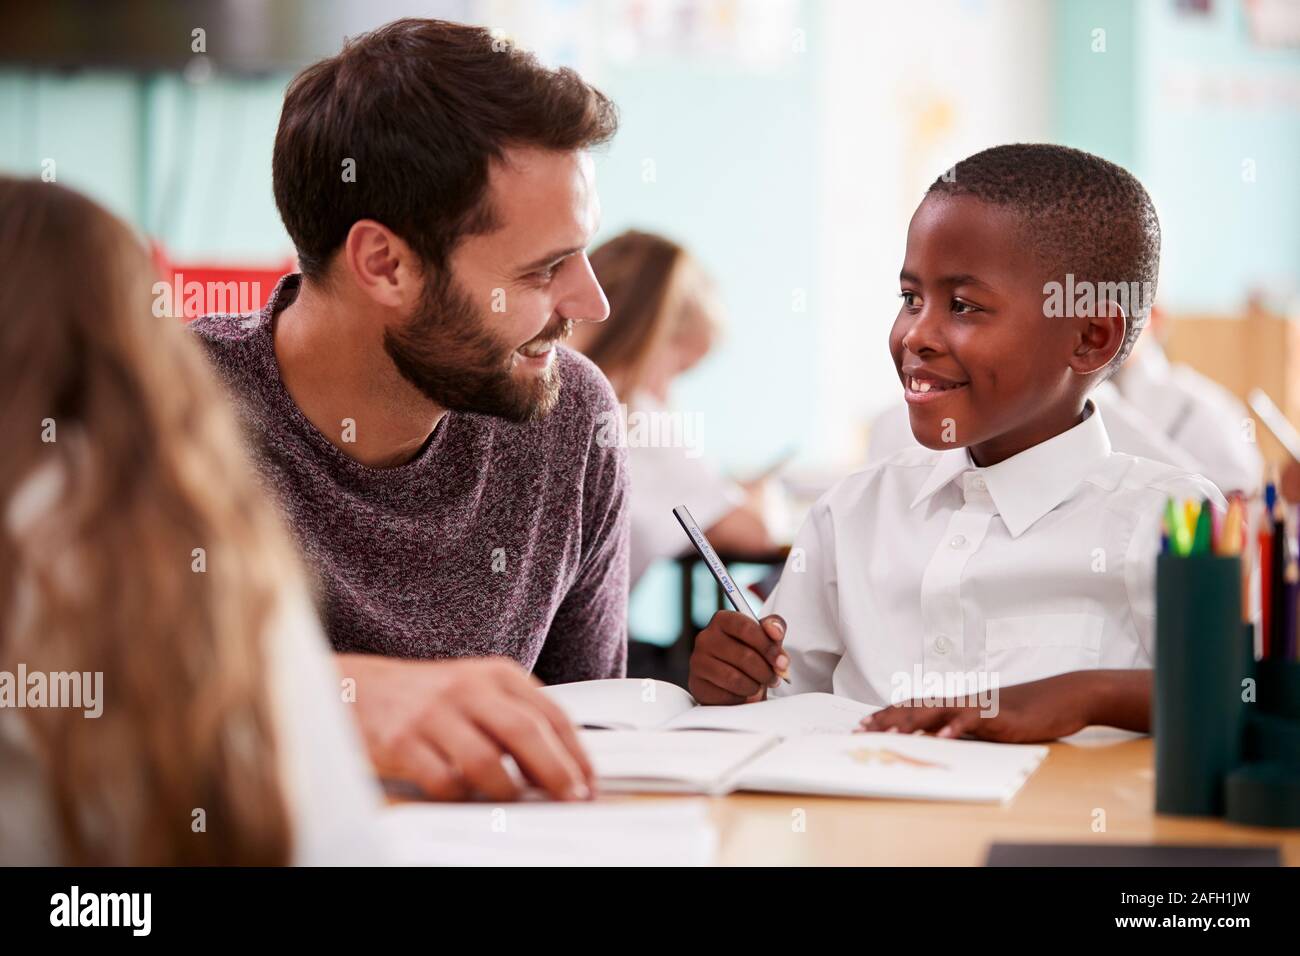 Elementary School Teacher Giving Male Pupil Wearing Uniform One To One Support In Classroom Stock Photo